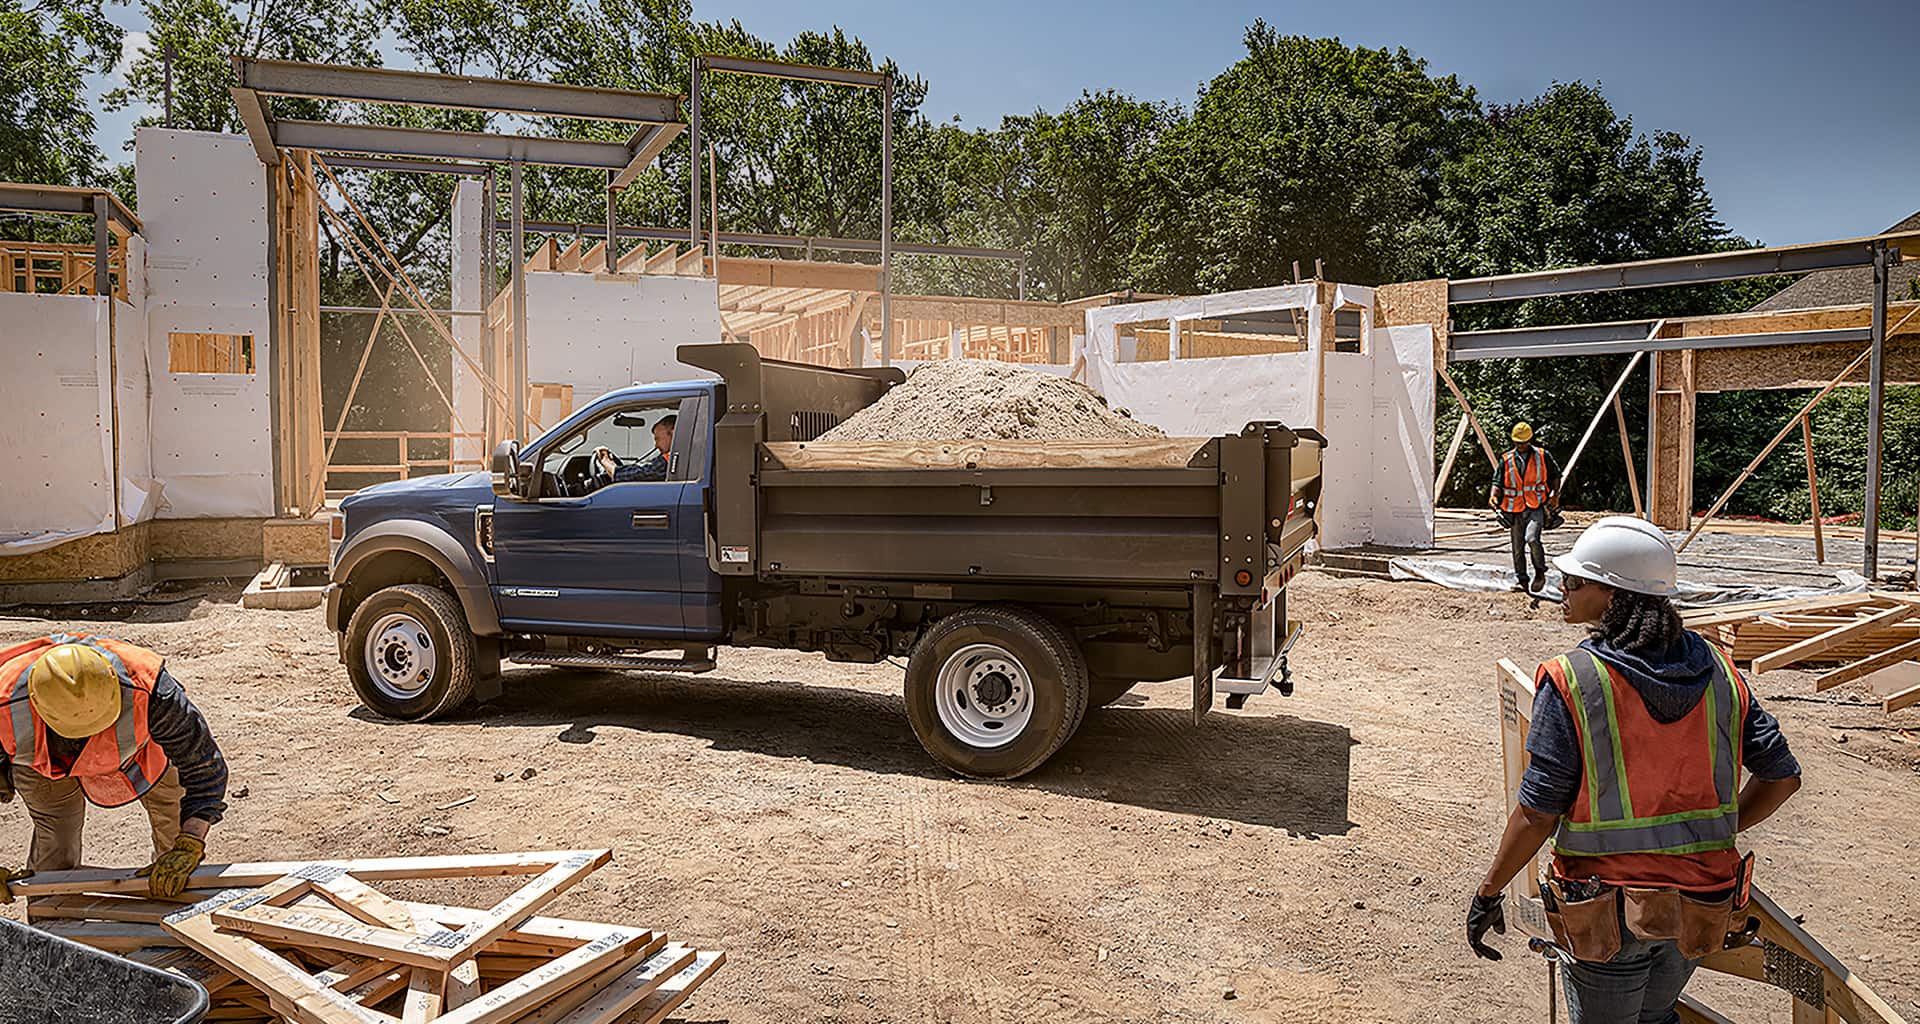 A 2020 Ford Super Duty chassis dump truck is being filled with dirt at a construction site.